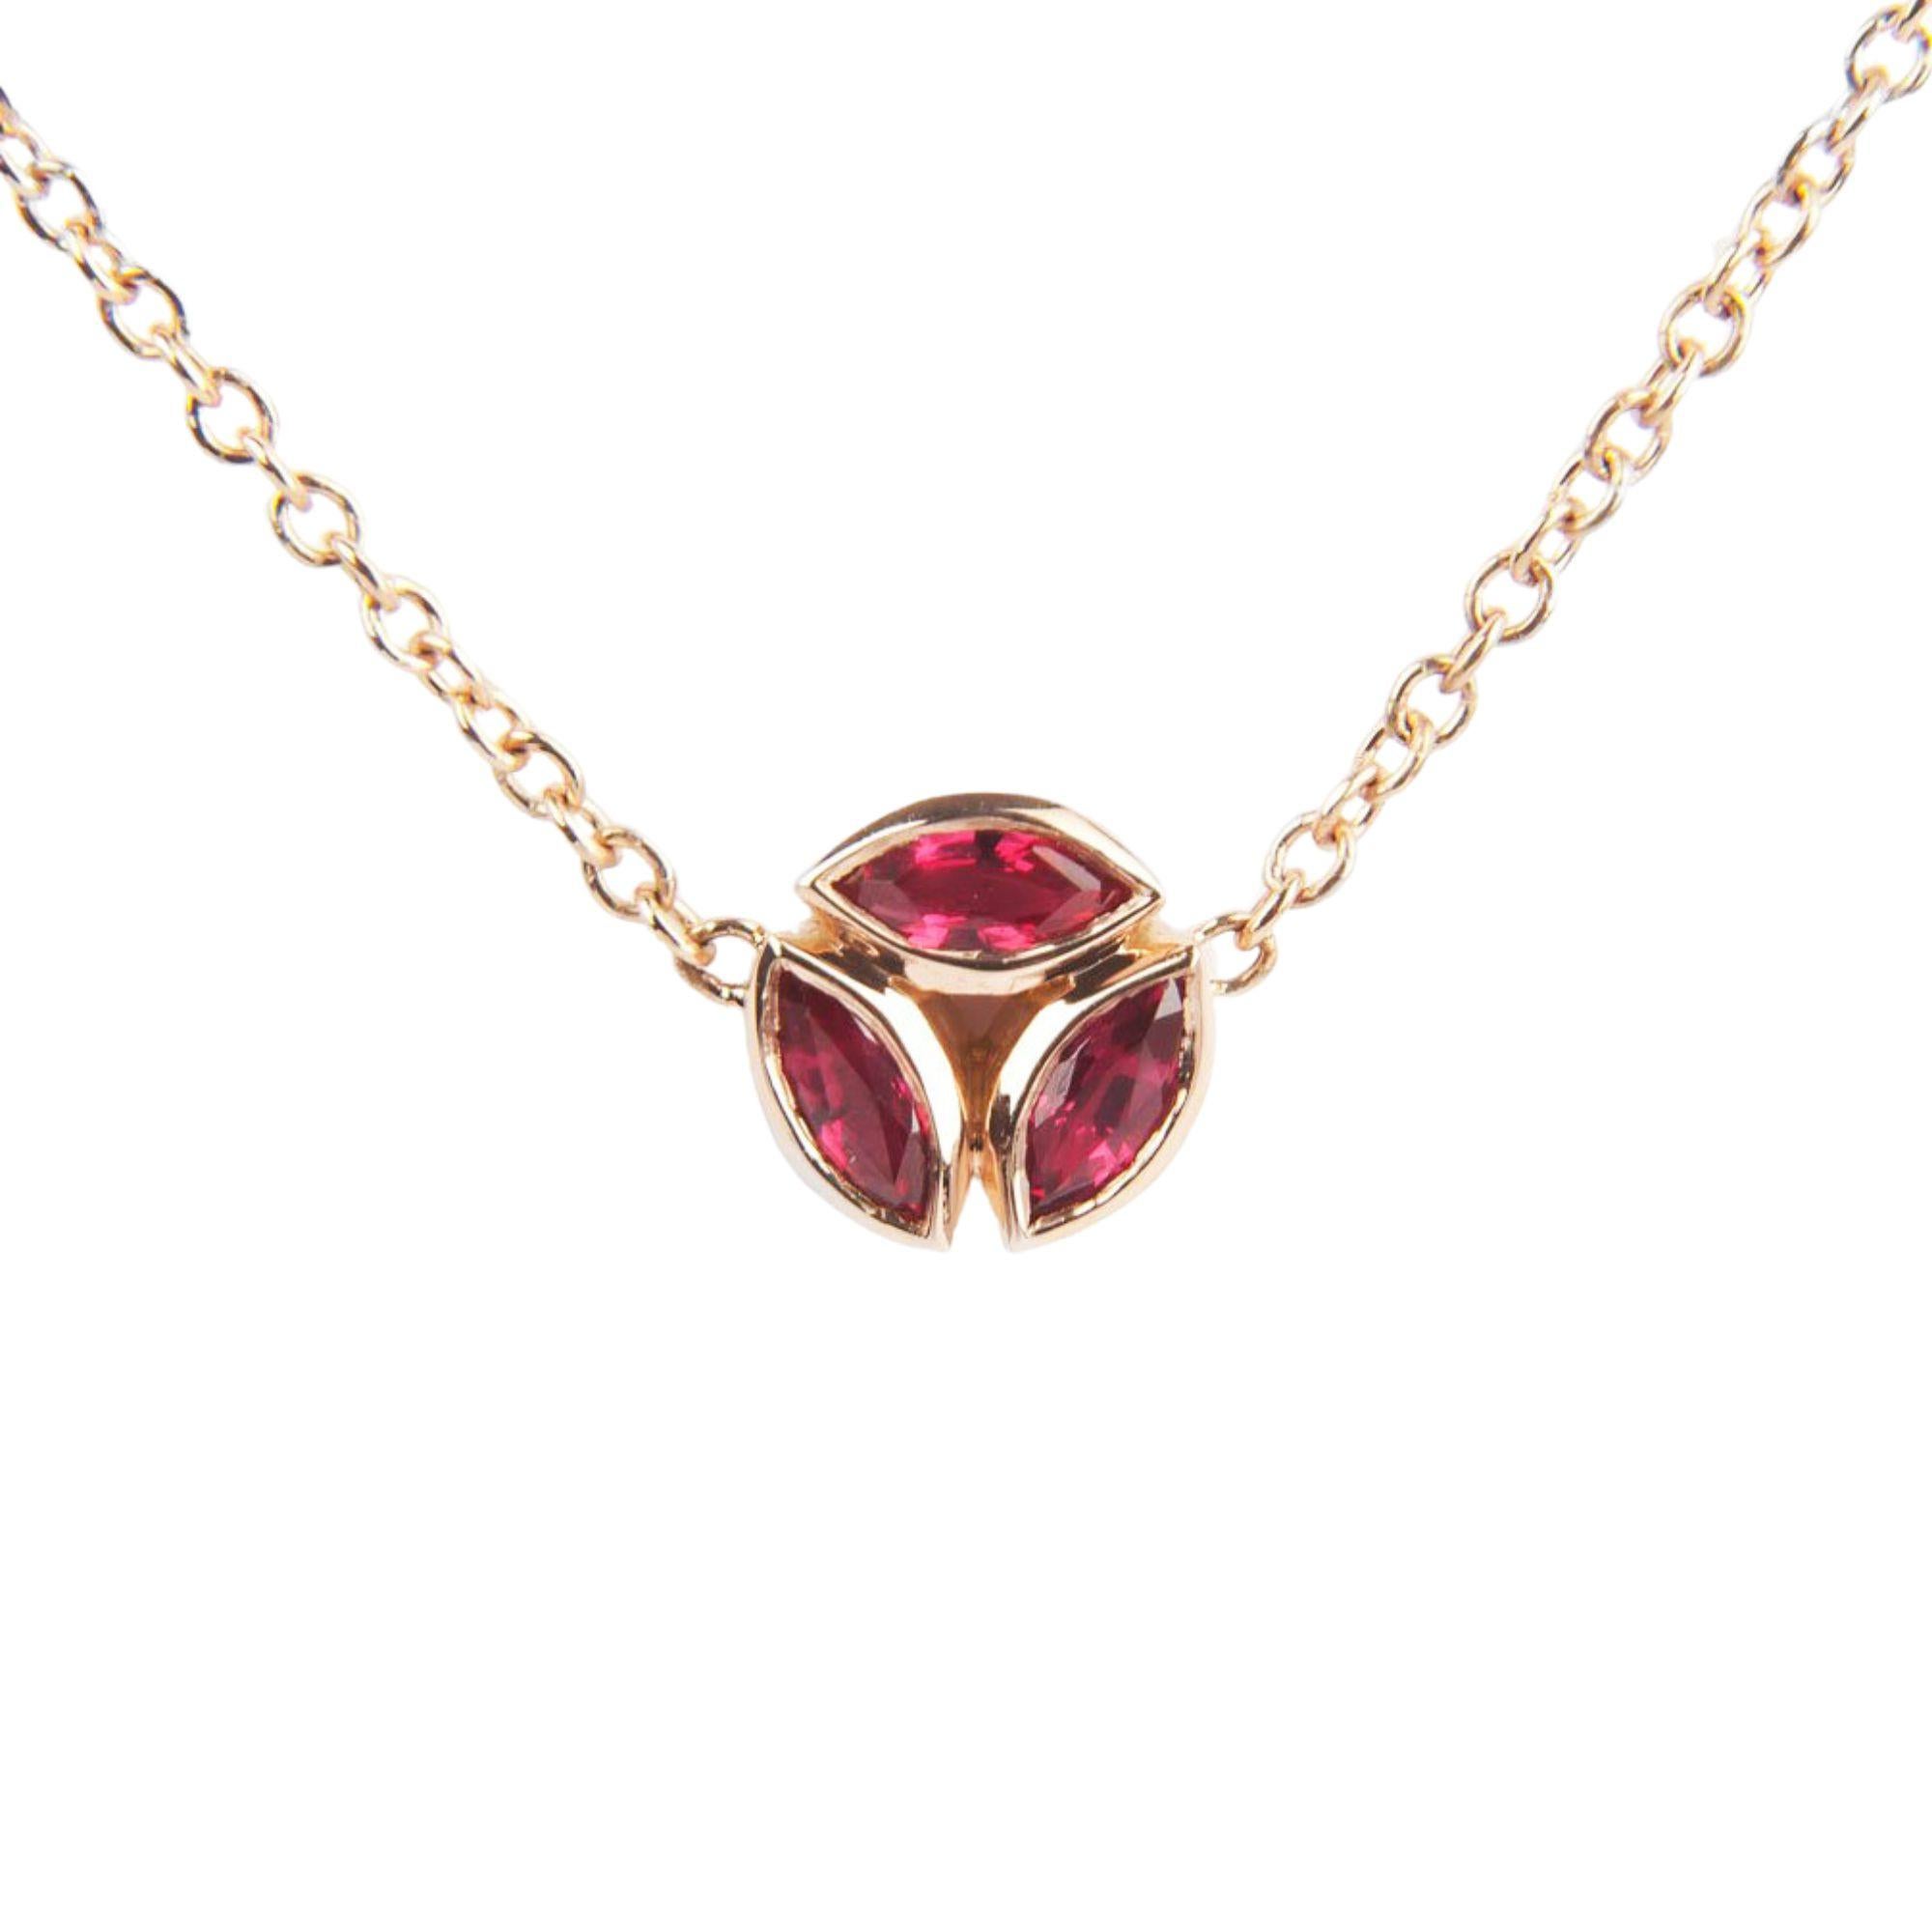 A trio of marquise cut rubies is suspended on a delicate rose gold chain. Ideal for layering.

18K rose gold chain
Bezel set ruby pendant (0.28 TCW)
15 – 16” adjustable chain